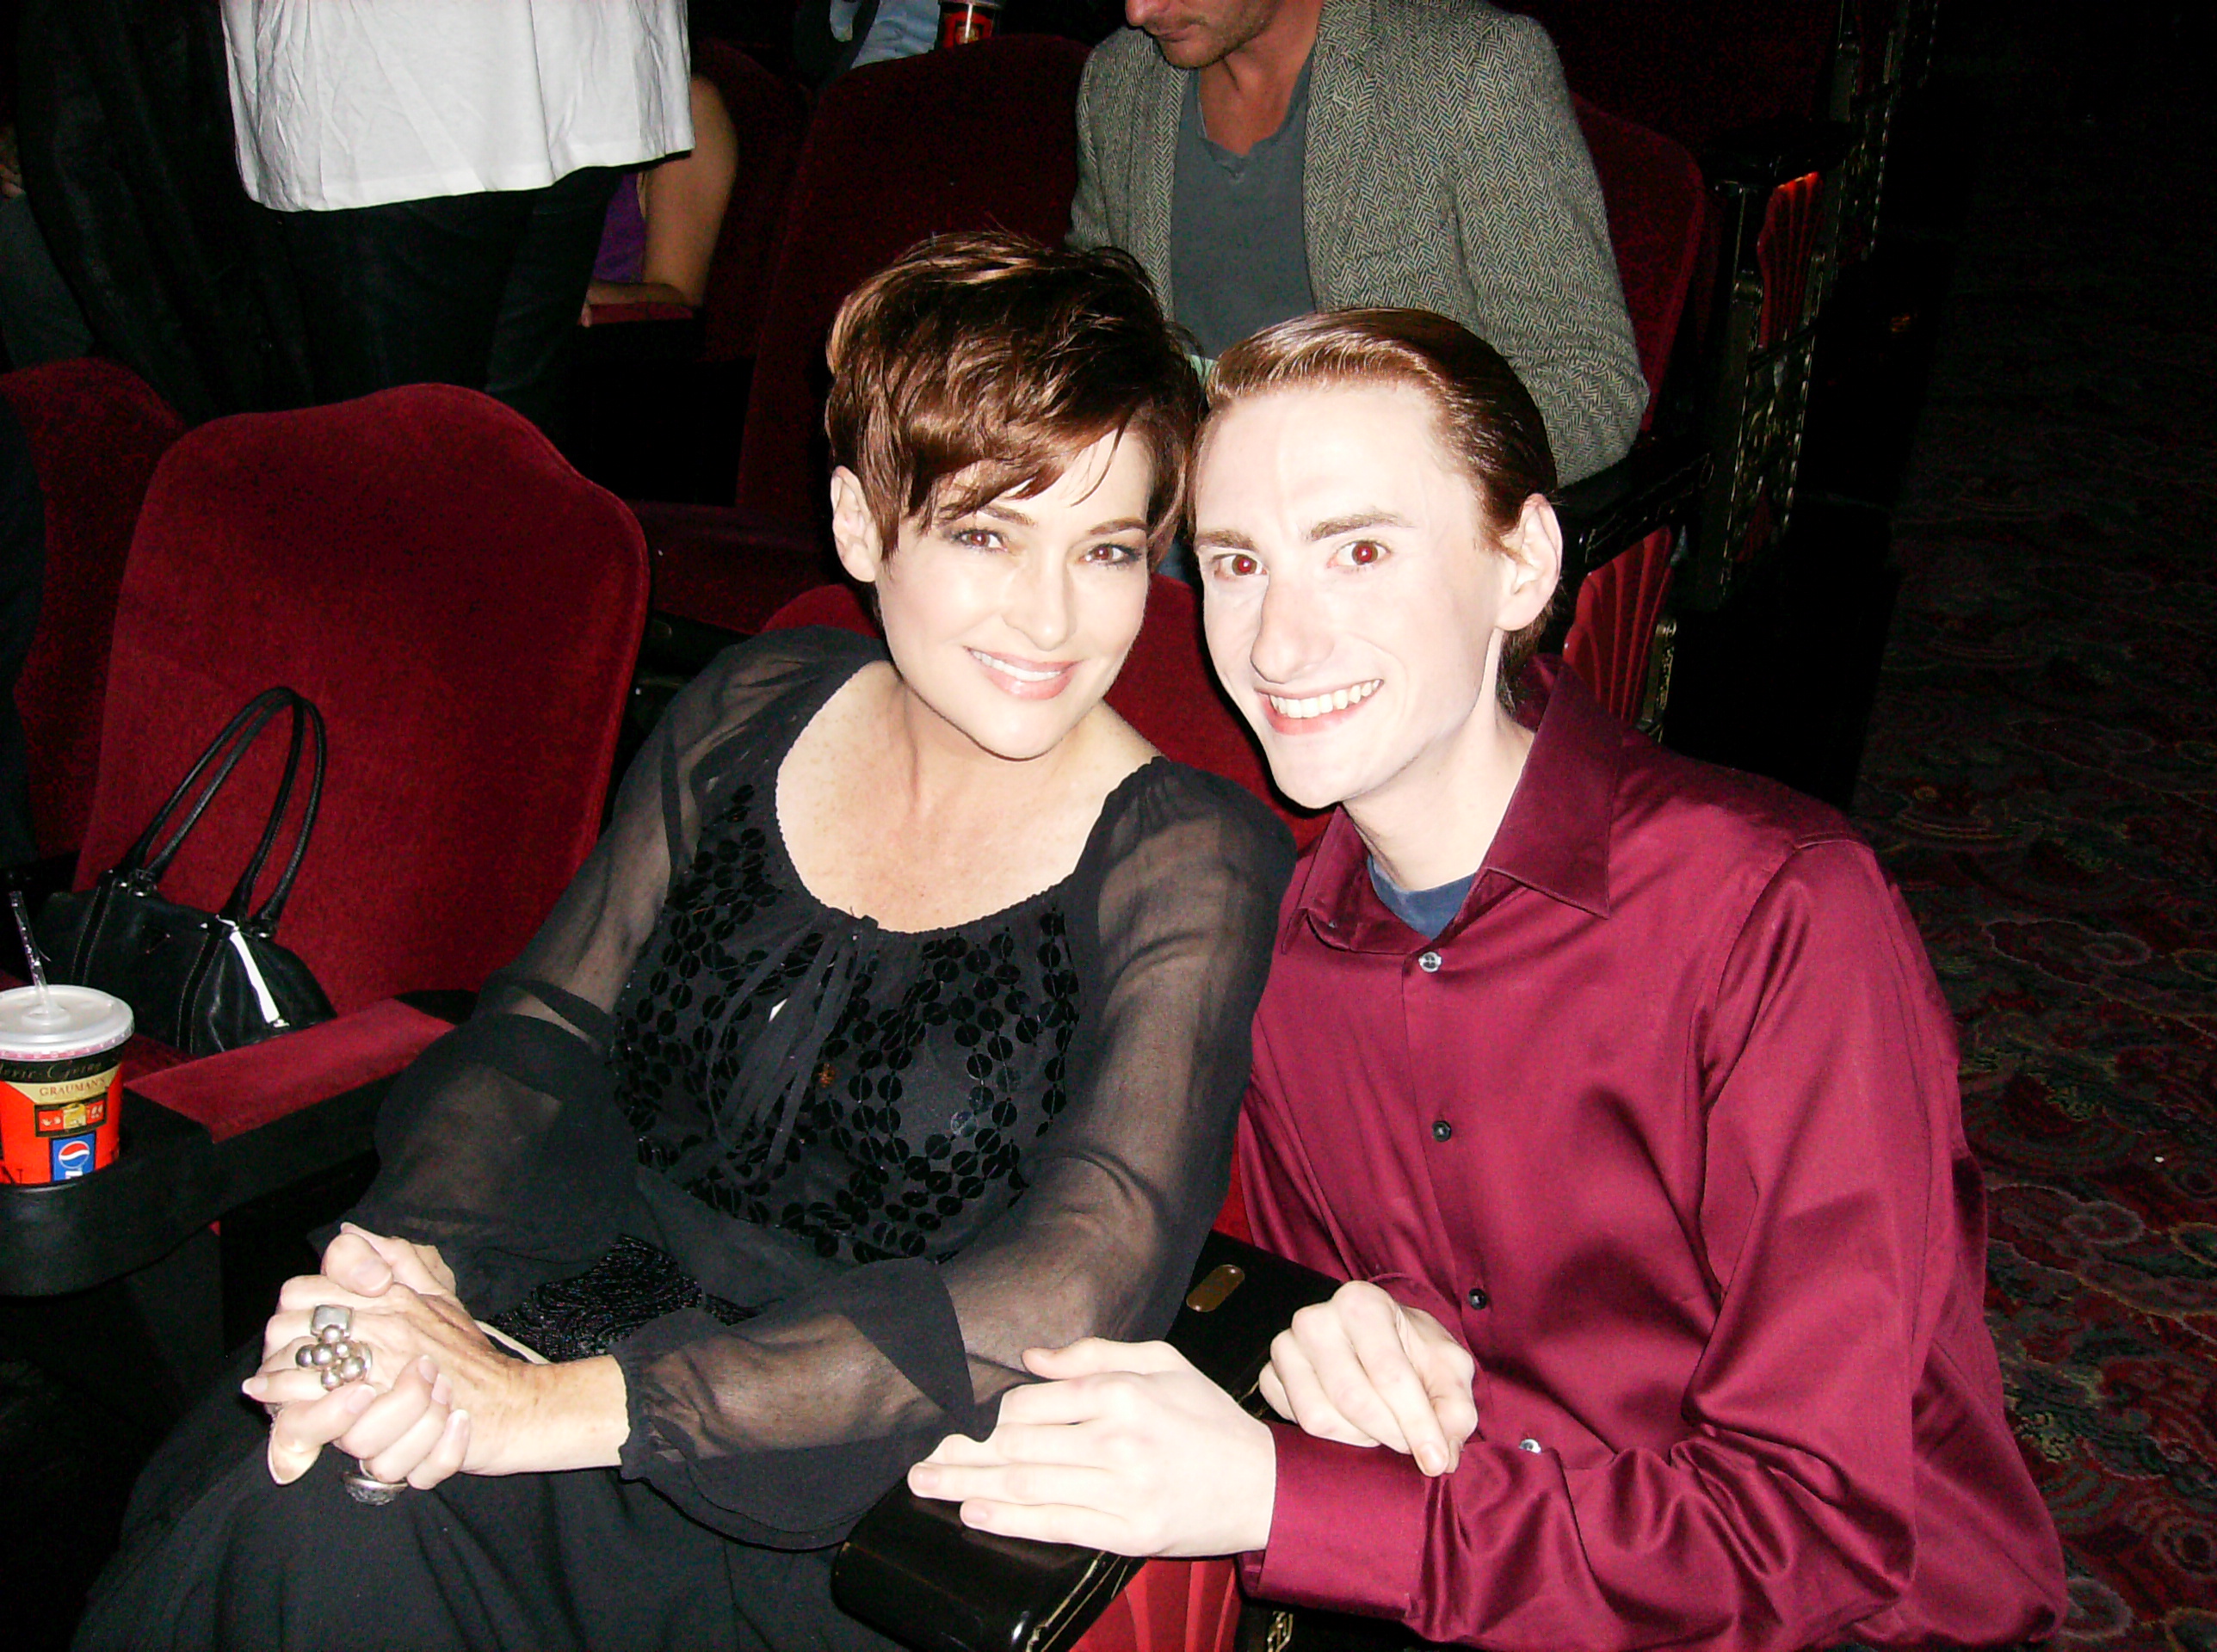 Joshua Patrick Dudley and Carolyn Hennesy at the Scream 4 Premiere in 2011